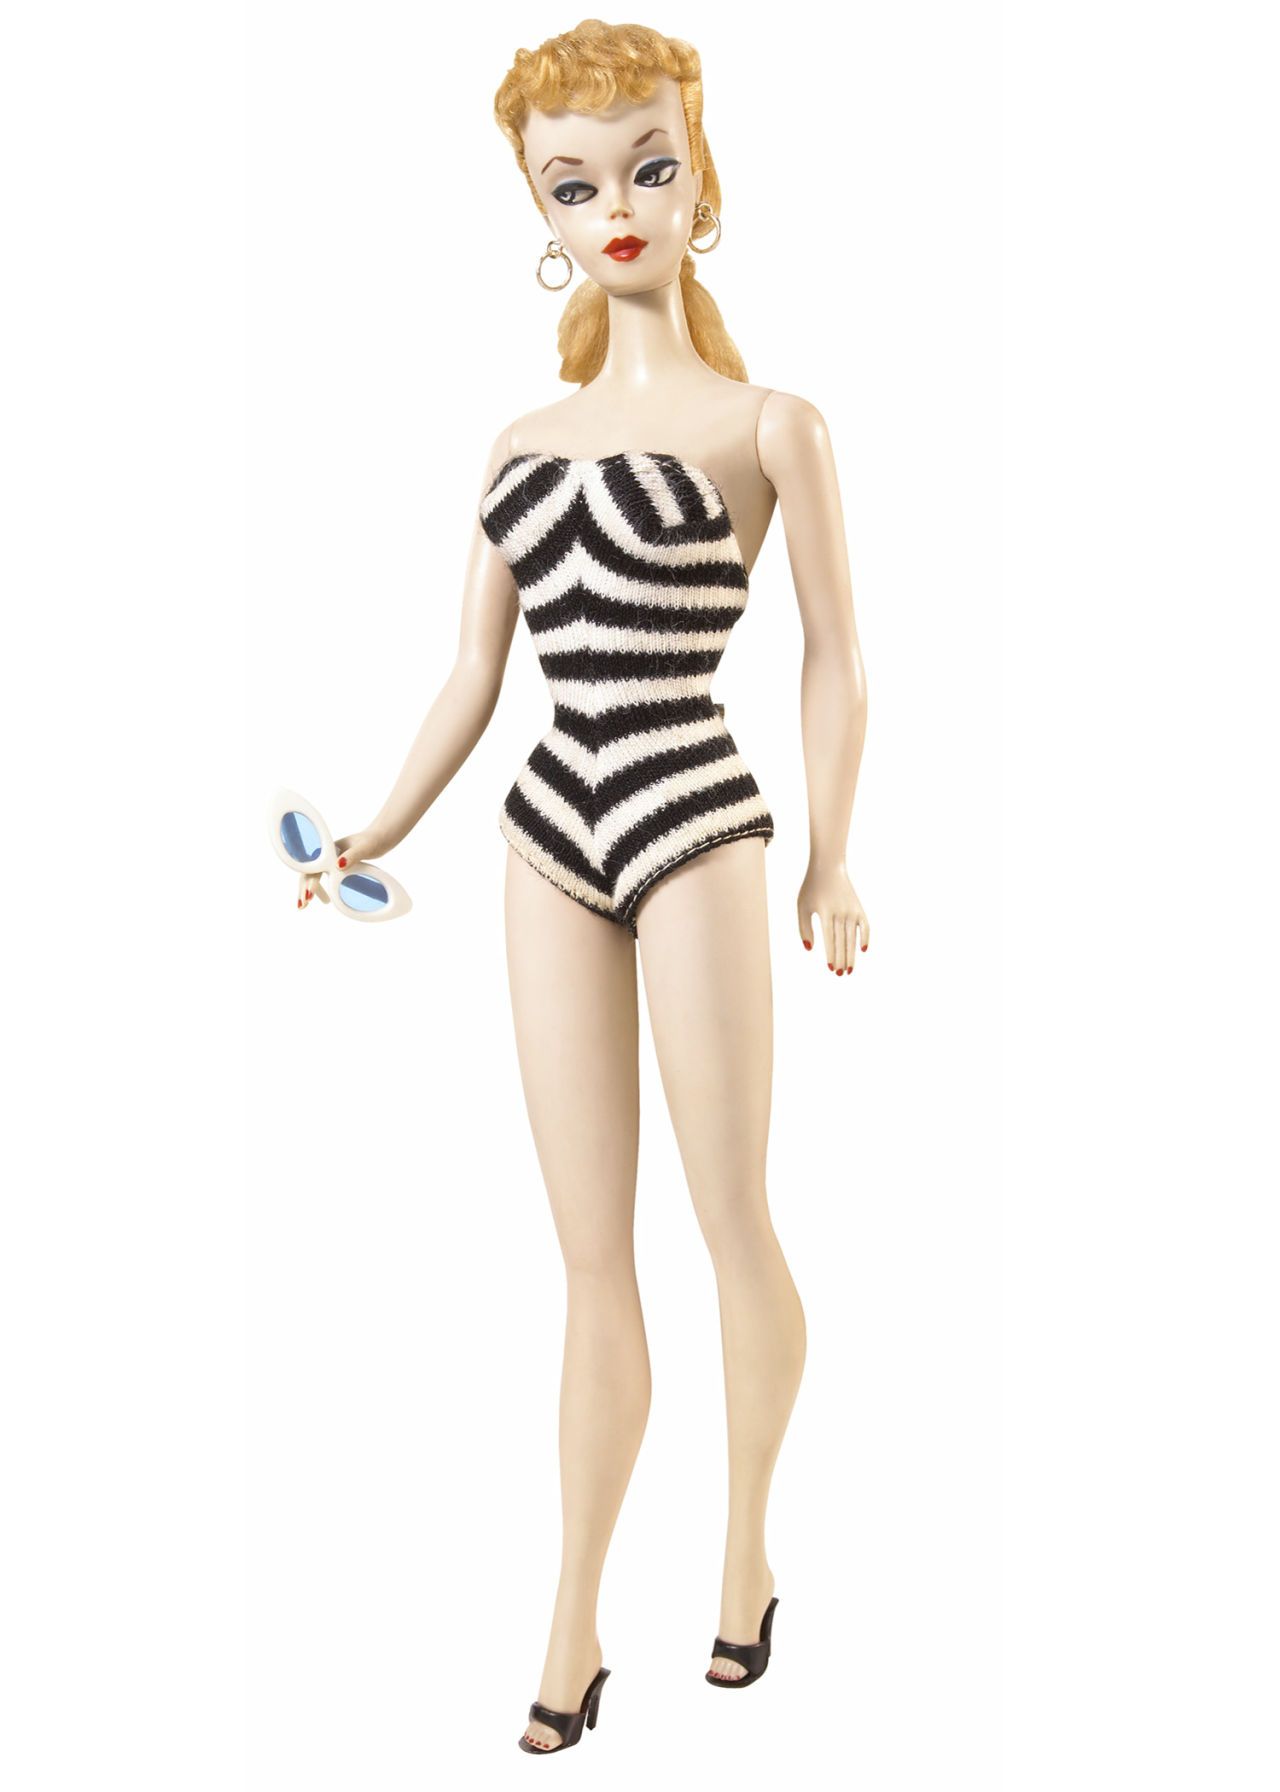 The 9 Most Expensive Barbie Dolls of 